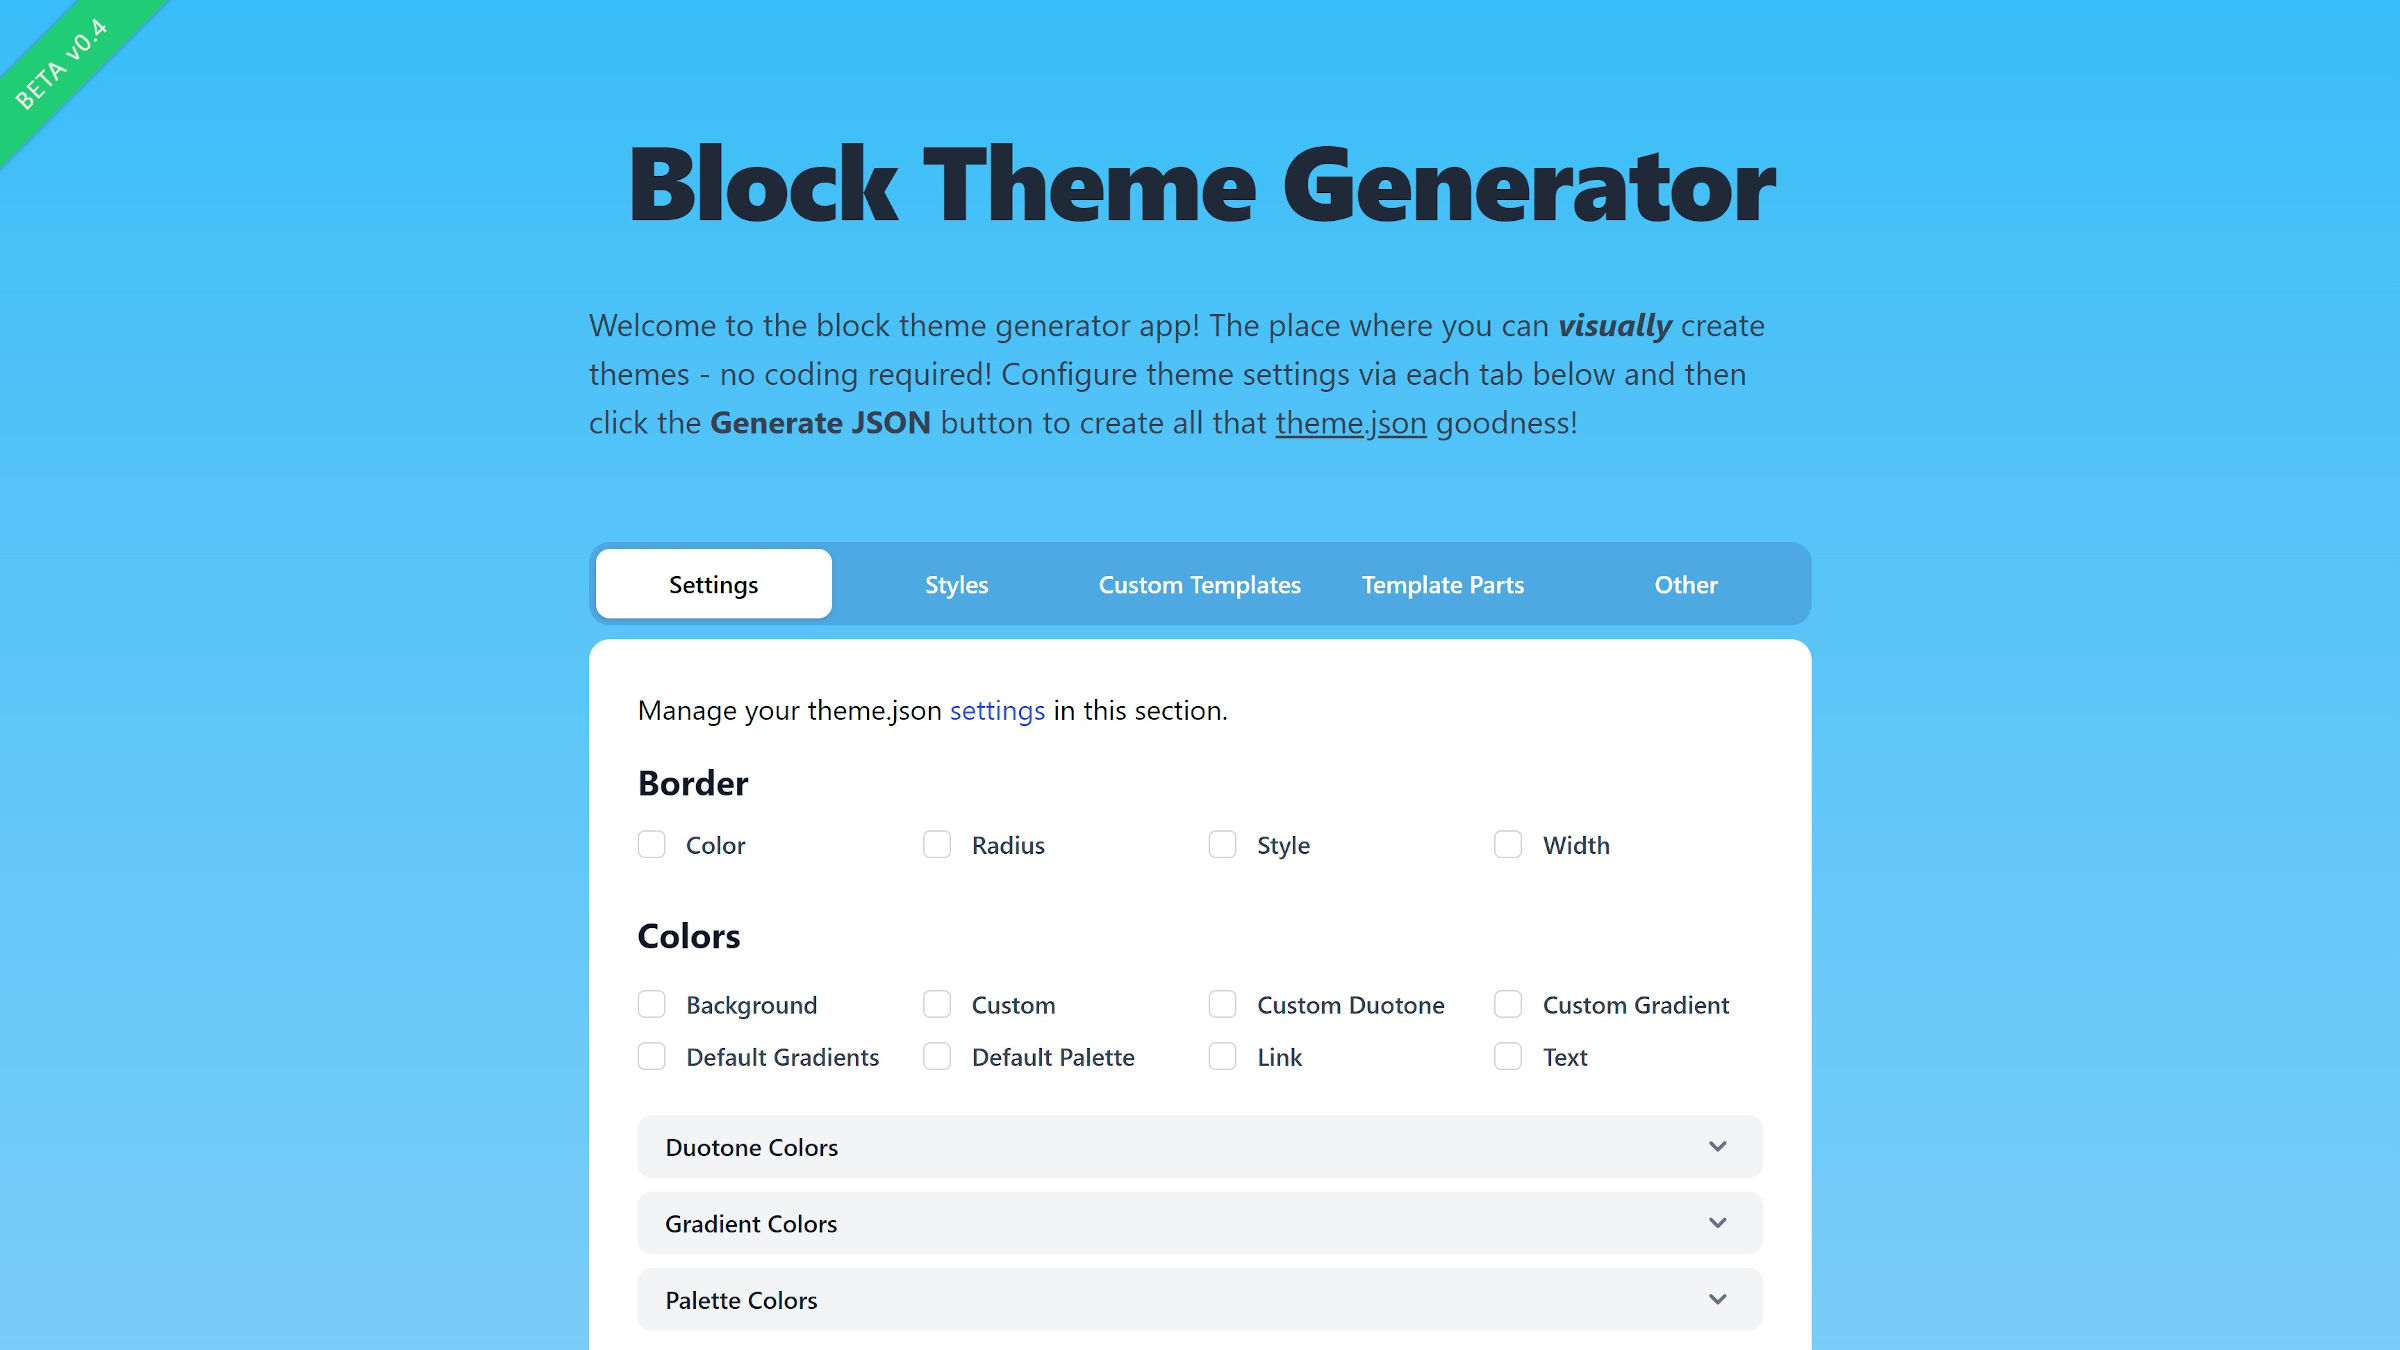 Screenshot of the top of the Block Theme Generator app page.  It displays an intro section and a settings form for generating a theme.json file for block WordPress themes.